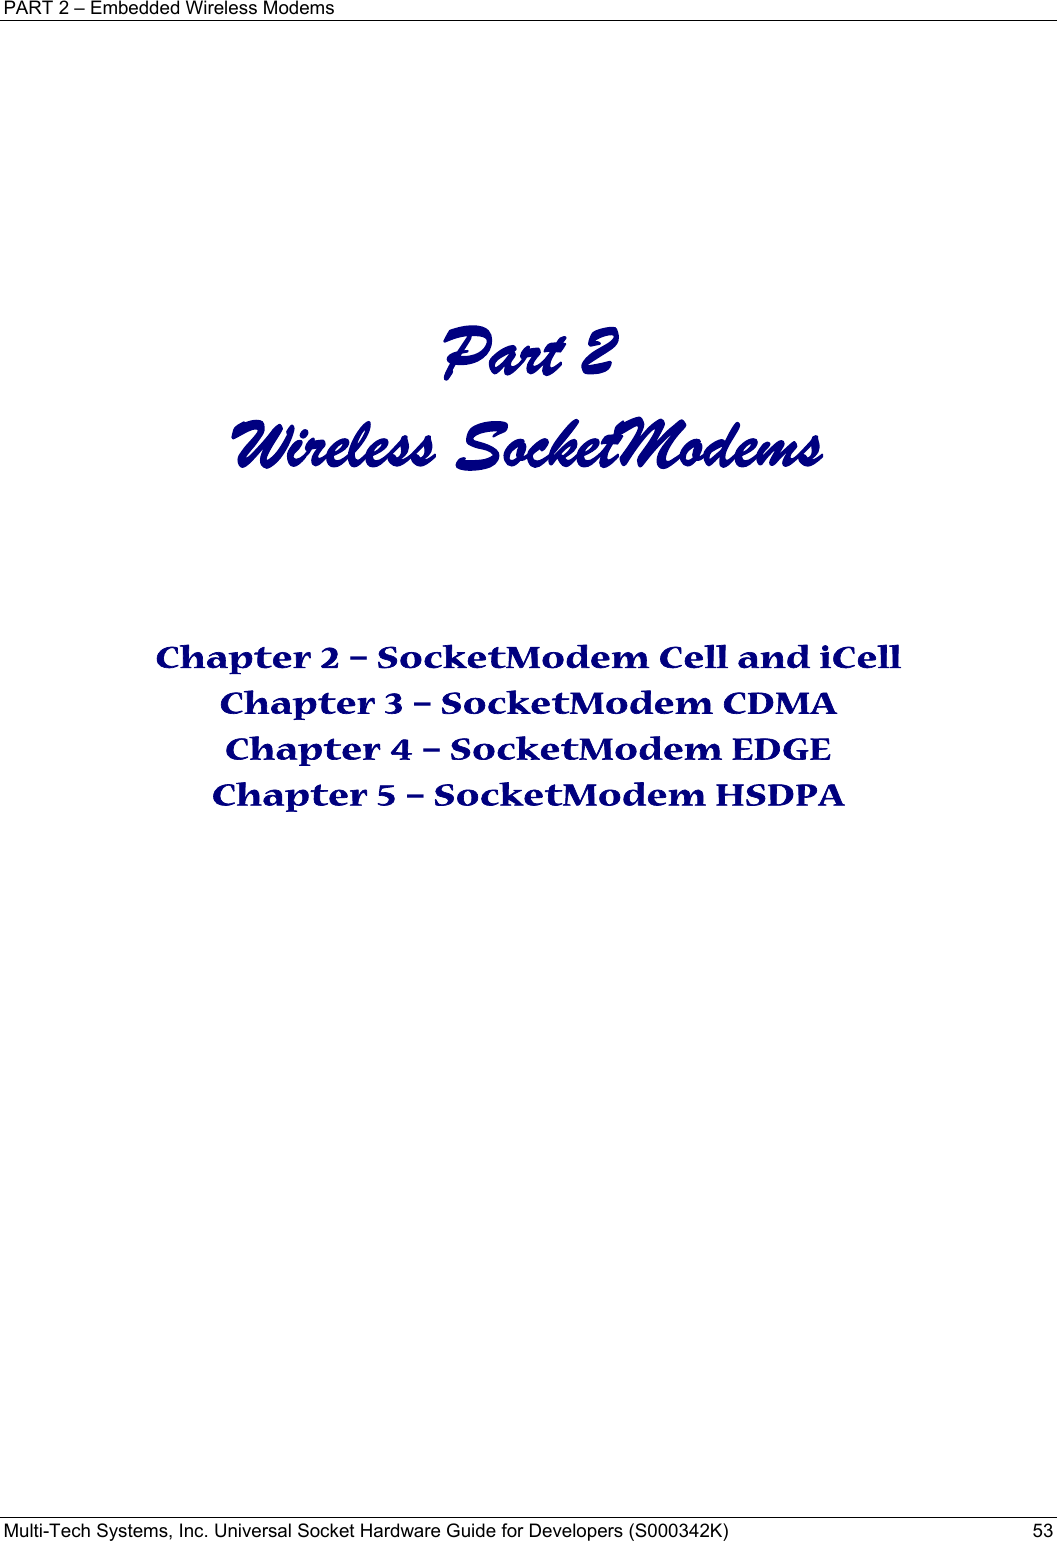 PART 2 – Embedded Wireless Modems Multi-Tech Systems, Inc. Universal Socket Hardware Guide for Developers (S000342K)  53     Part 2 Wireless SocketModems      Chapter 2 – SocketModem Cell and iCell Chapter 3 – SocketModem CDMA Chapter 4 – SocketModem EDGE Chapter 5 – SocketModem HSDPA     